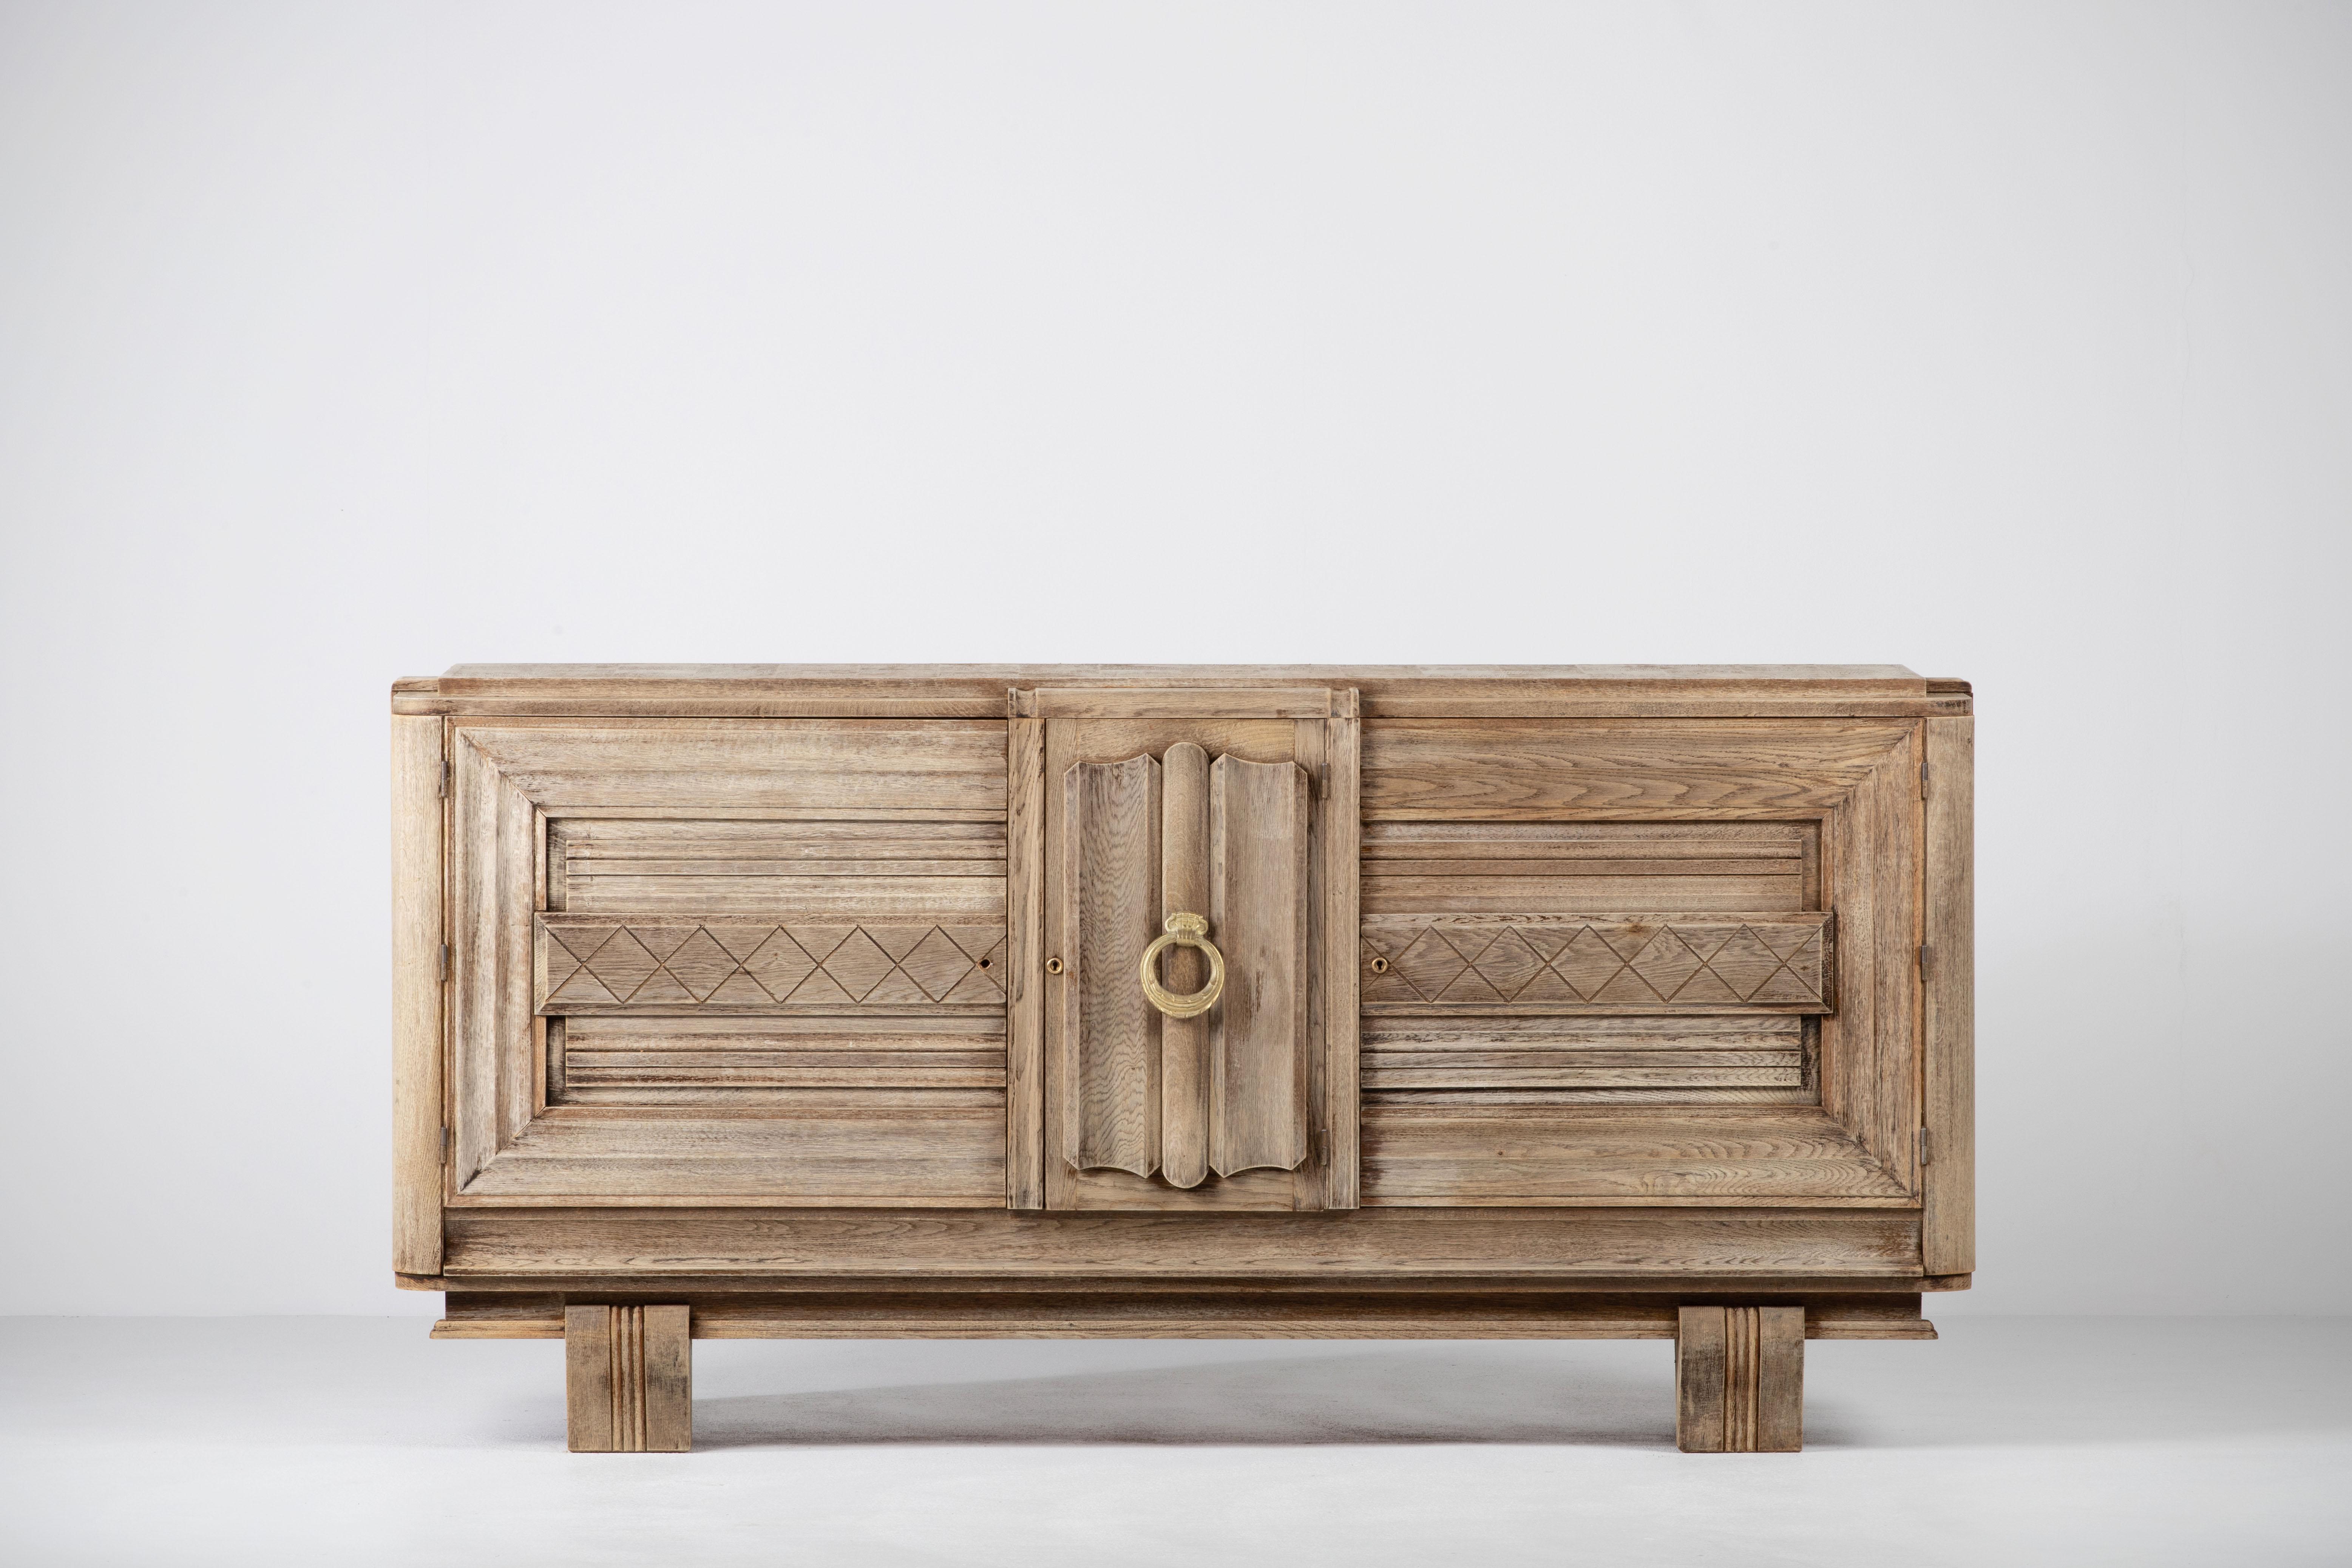 Credenza, solid oak, France, 1940s.
Large Art Deco Brutalist sideboard. 
The credenza consists of three storage facilities and covered with very detailed designed doors. 
The refined wooden structures on the doors create a striking combination